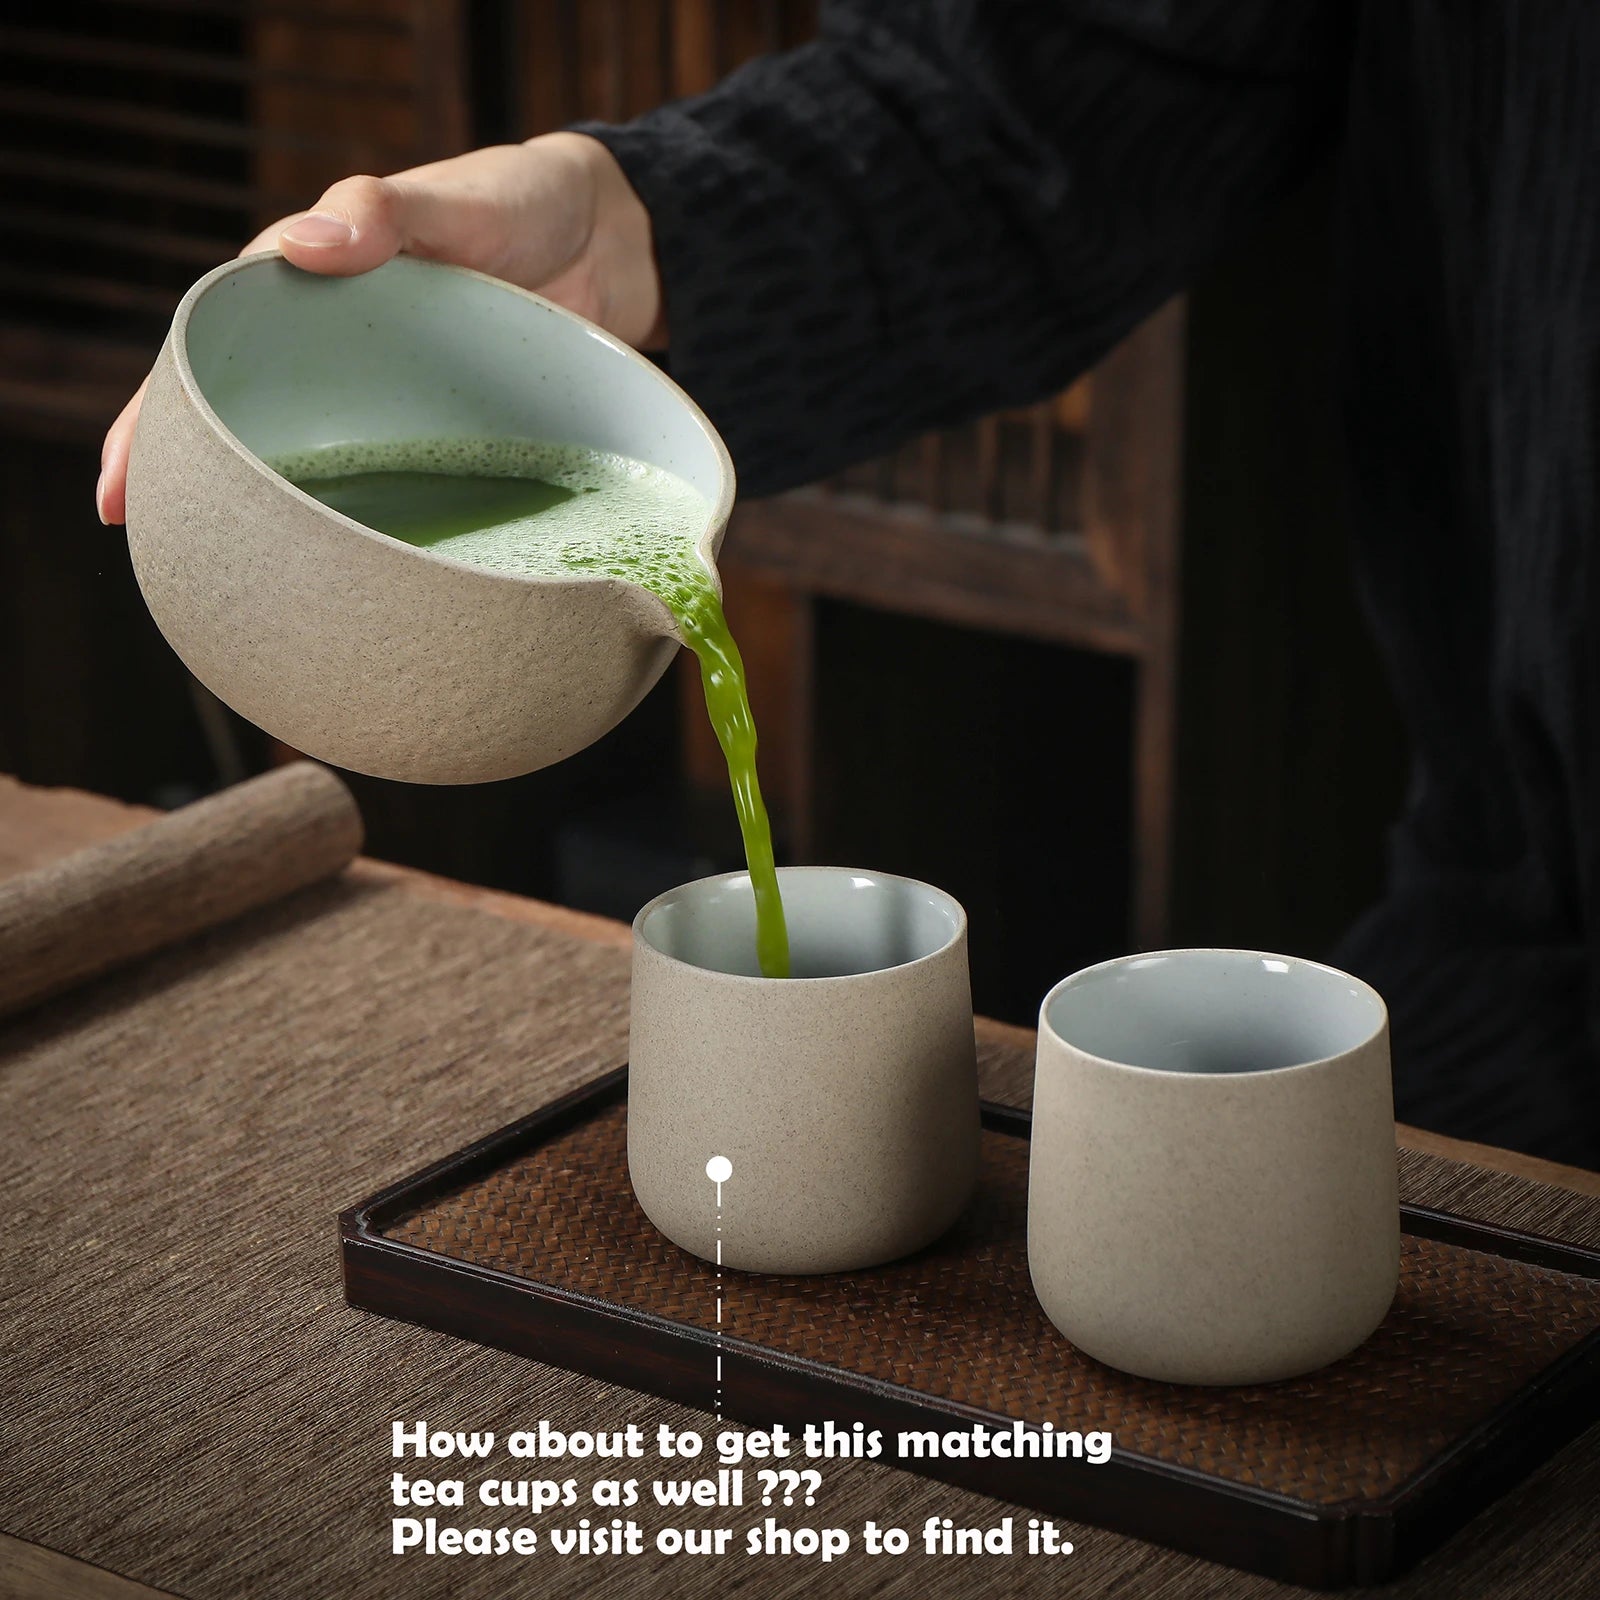 Preparing several servings of matcha (Tea Bowl with Serving Spout